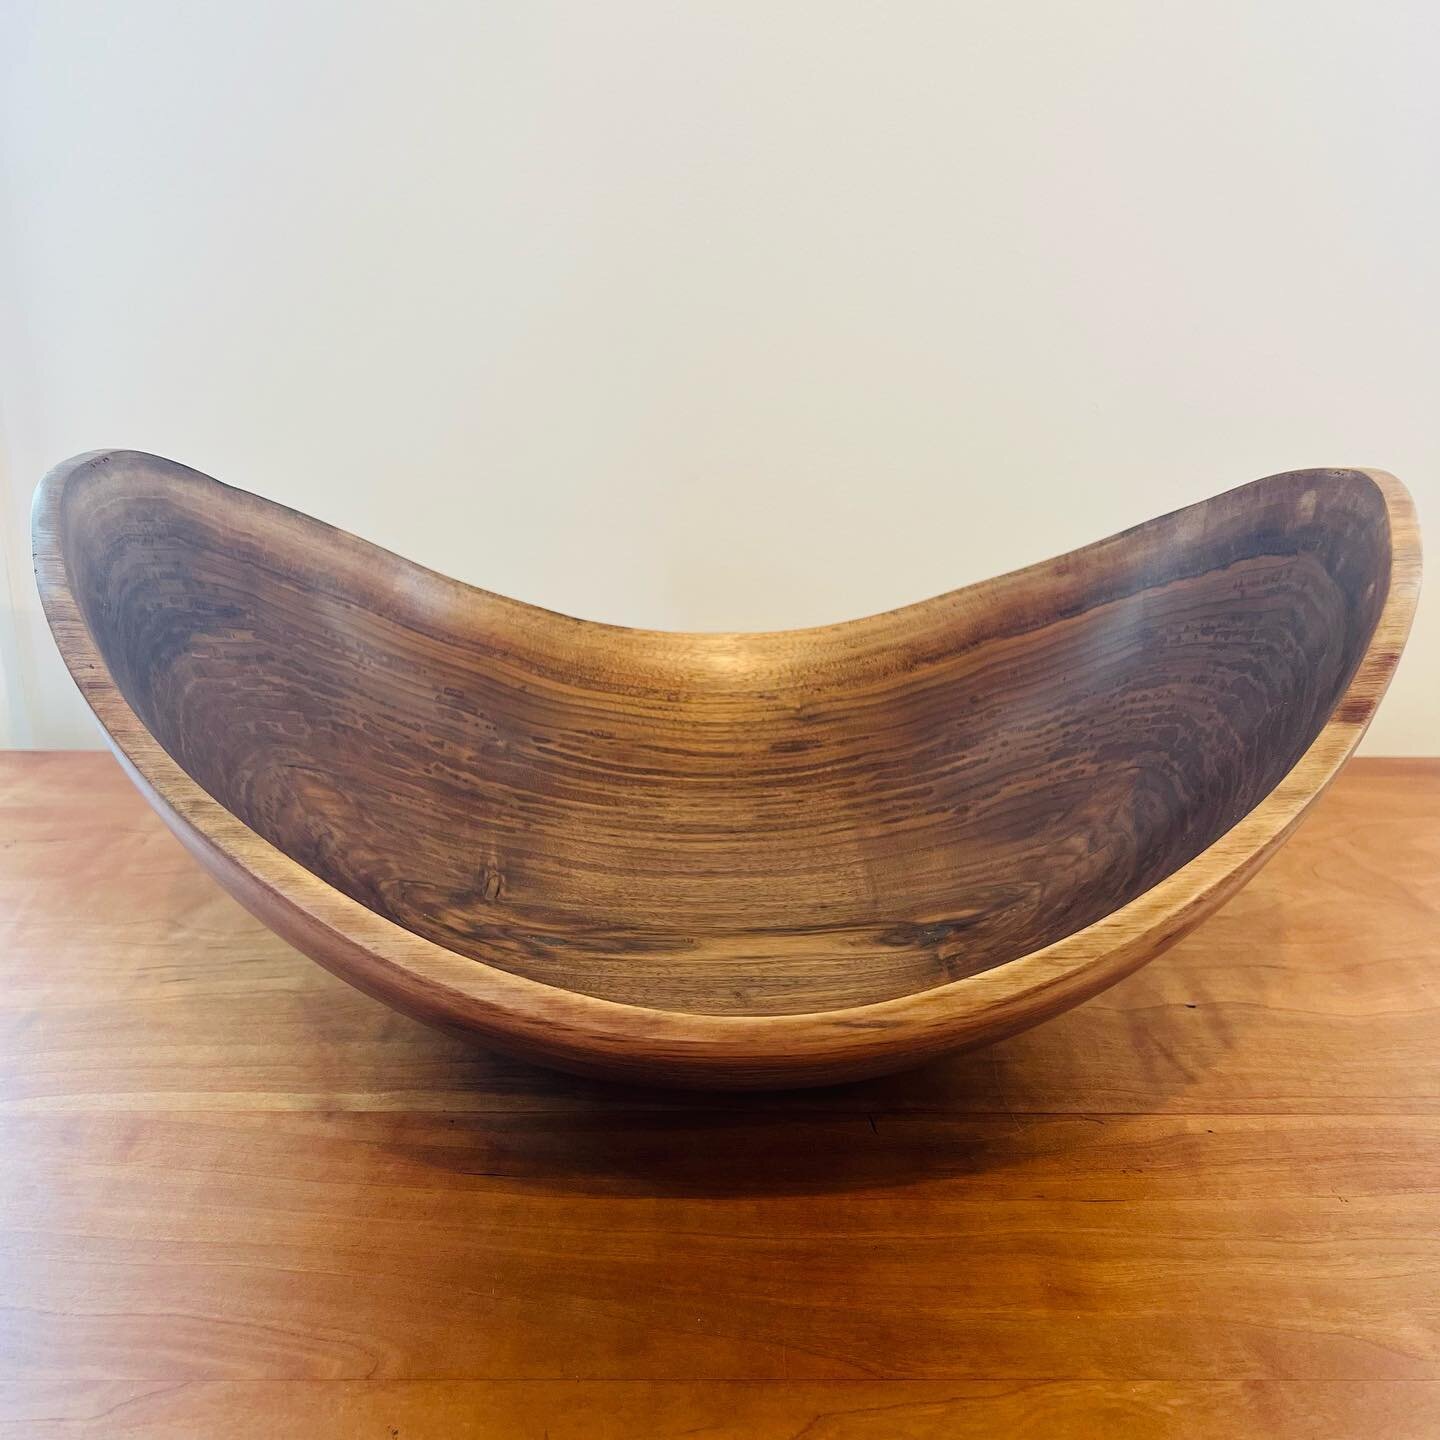 Beautiful carved bowls by Tom Dunne of Middlebury, Vermont. Examples of his work in order of appearance&hellip;
1) Large live edge walnut bowl  2) Live edge ash bowl  3) Small live edge walnut bowl  Tom creates simple, clean, organic shapes out of lo